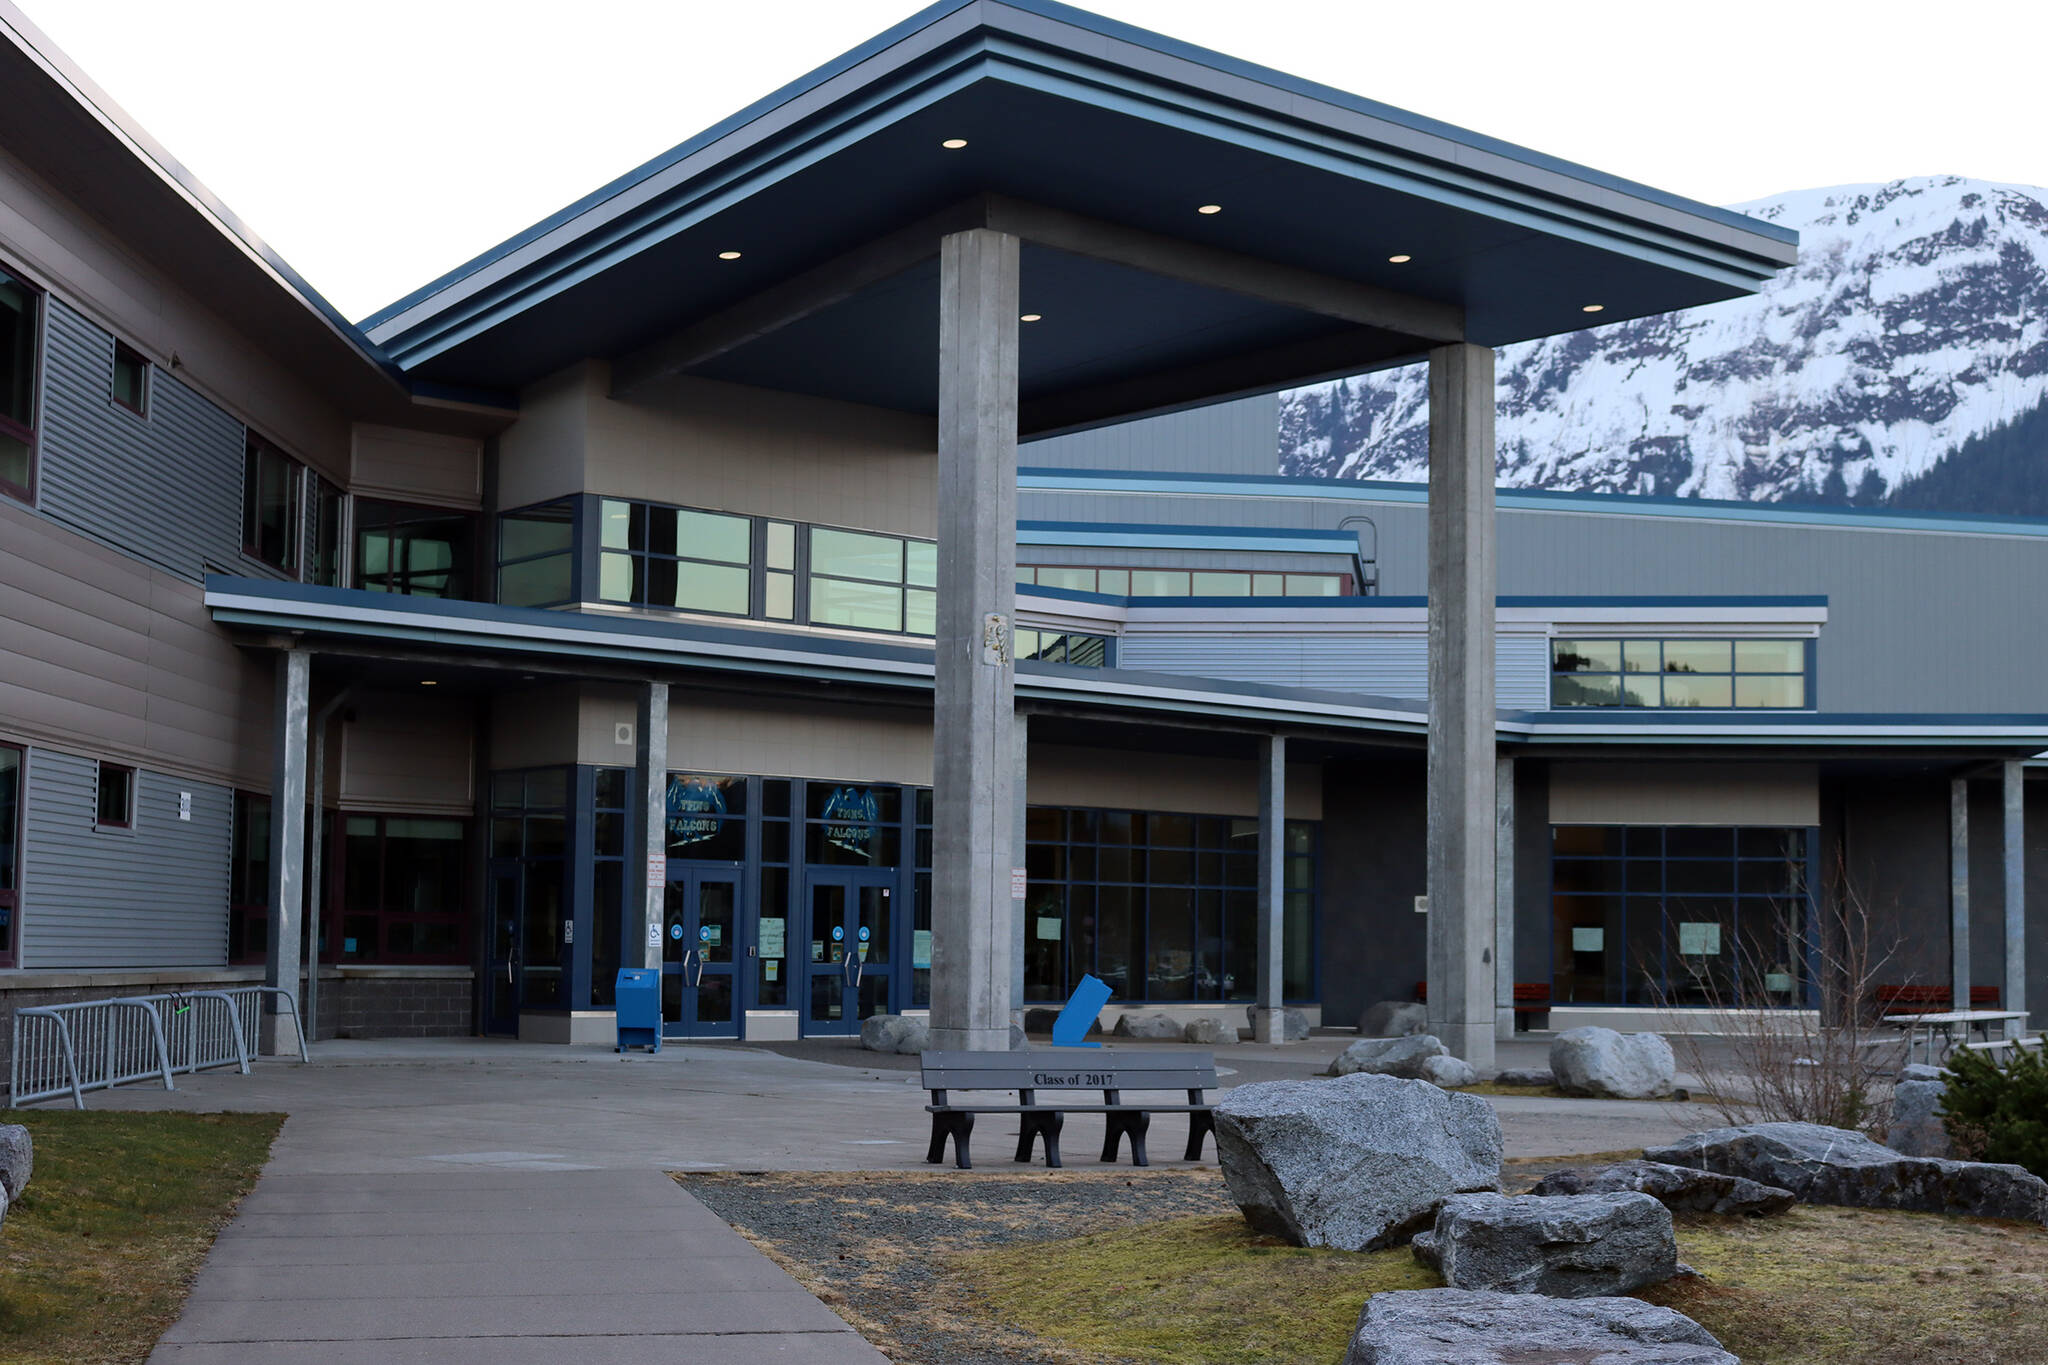 Thunder Mountain High School on April 18. Earlier this fall, vandalism including stolen soap dispensers and toilets clogged with foreign objects such as paper towel rolls were a problem at schools nationwide and in Juneau. But, principals say the local situation is improving. (Ben Hohenstatt / Juneau Empire File)